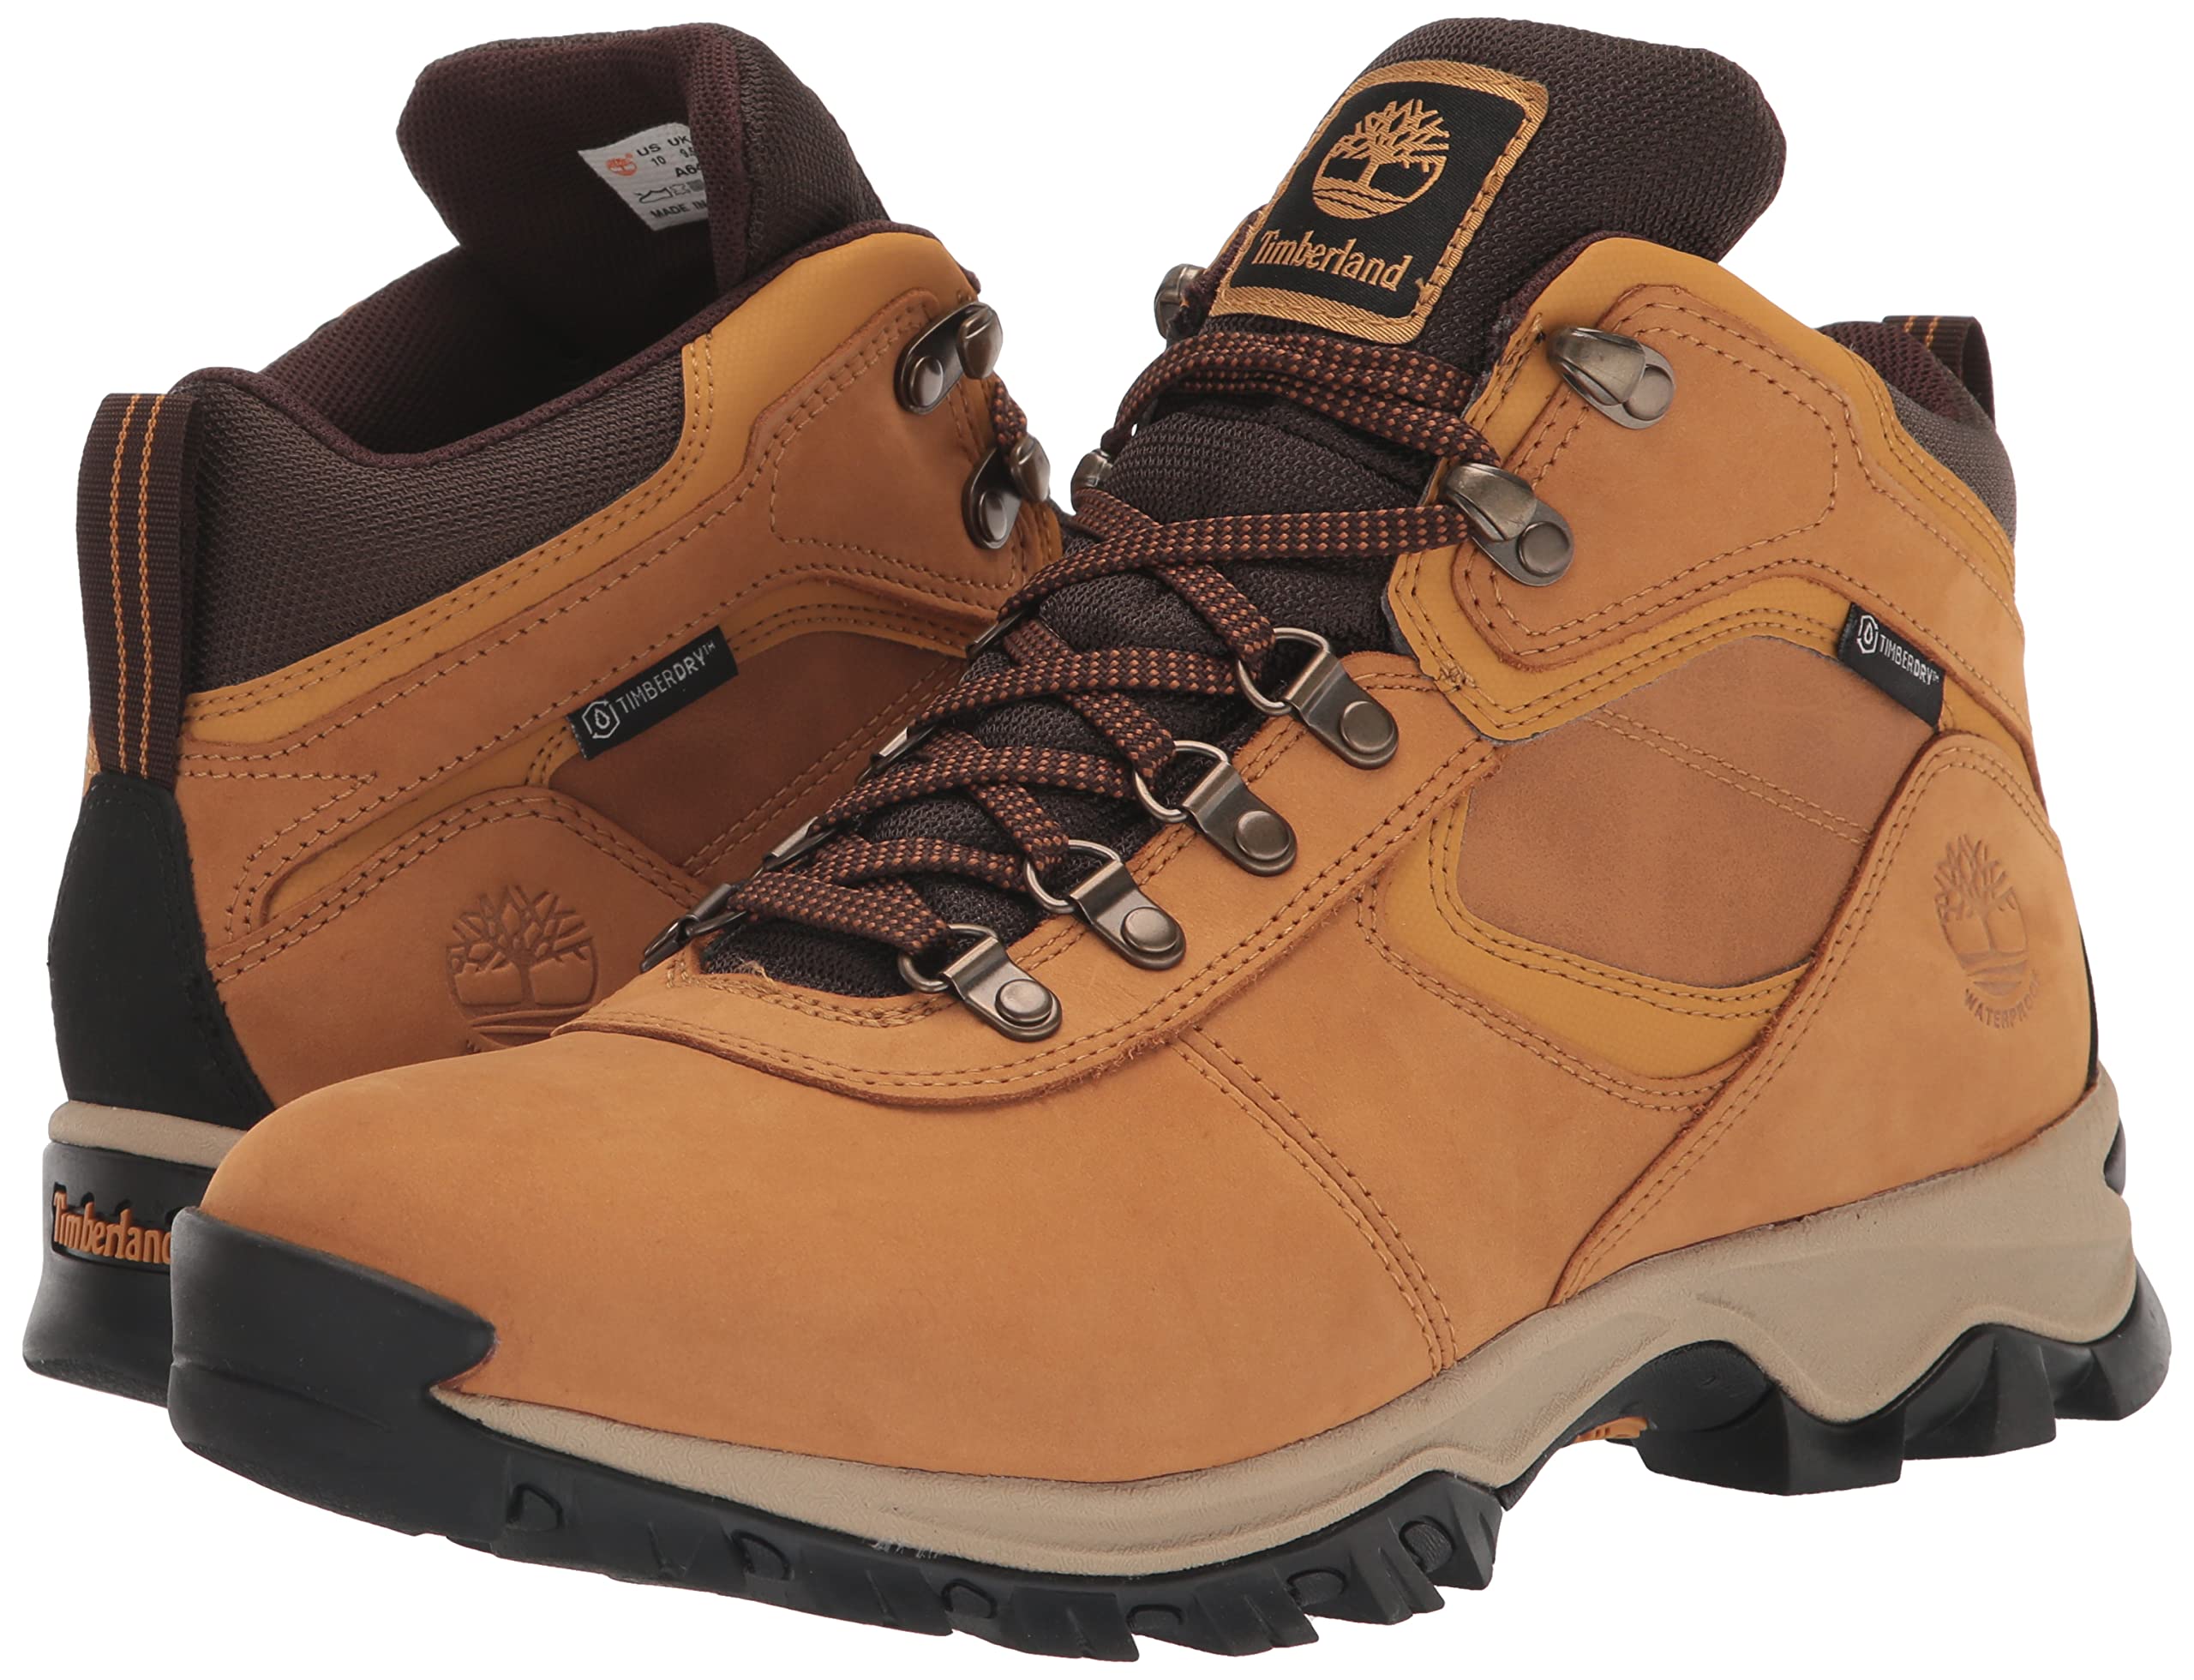 Timberland Men's Mt. Maddsen Anti-Fatigue Hiking Wateproof Leather Boots